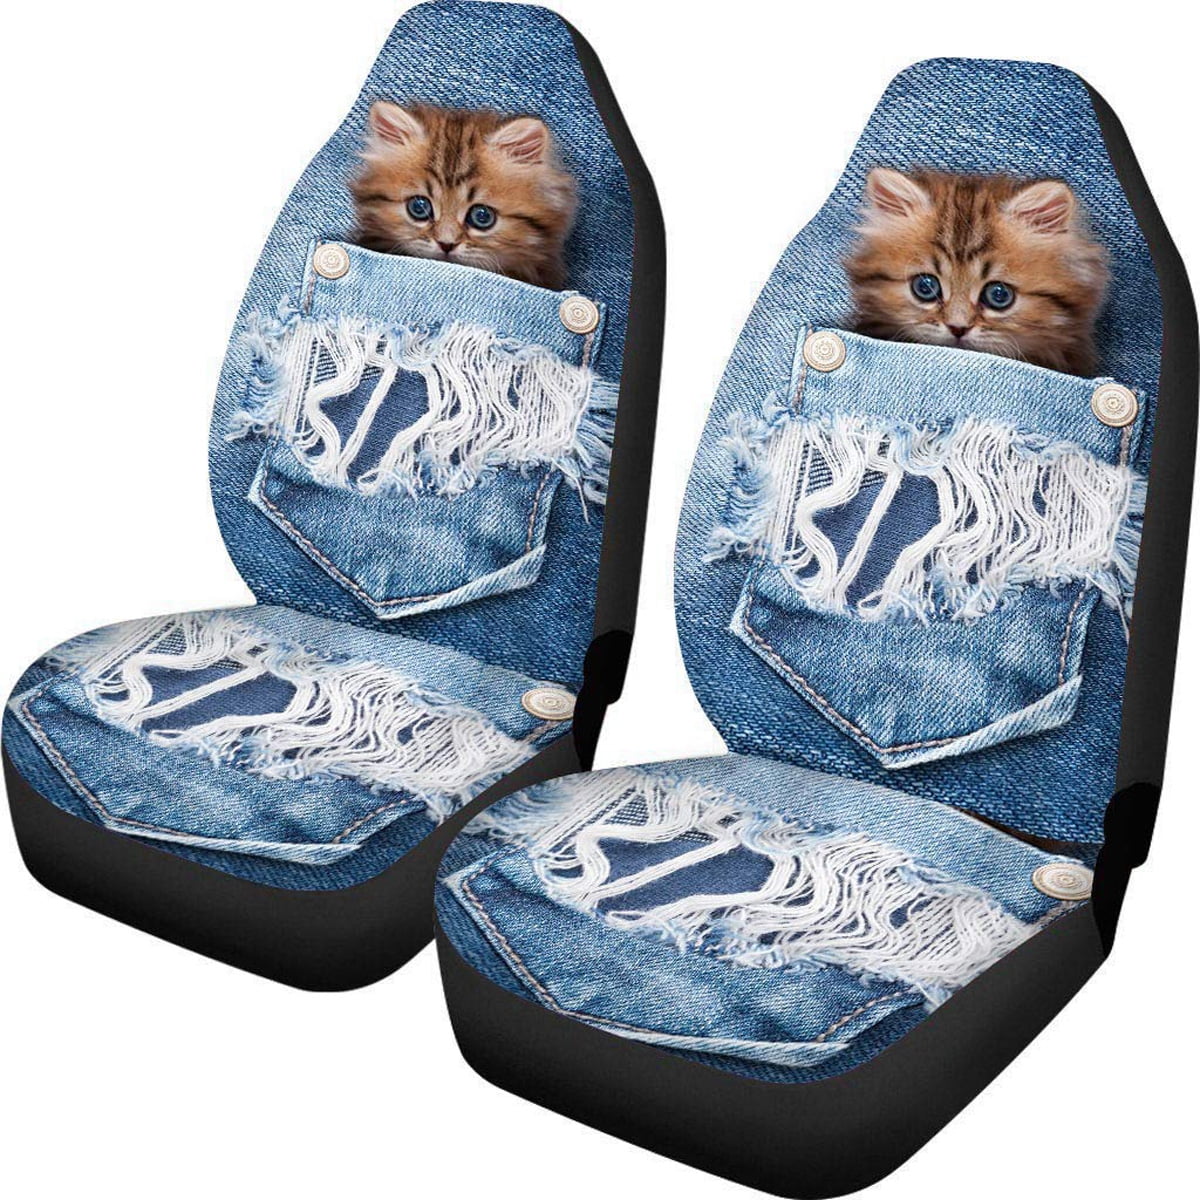 KUIFORTI Black Cat Car Seat Covers Set of 2,Stretchy Carpet Universal Auto Front Seats Protector Fits for Car,SUV Sedan,Truck for Women Men Gift Auto Interior Accessories